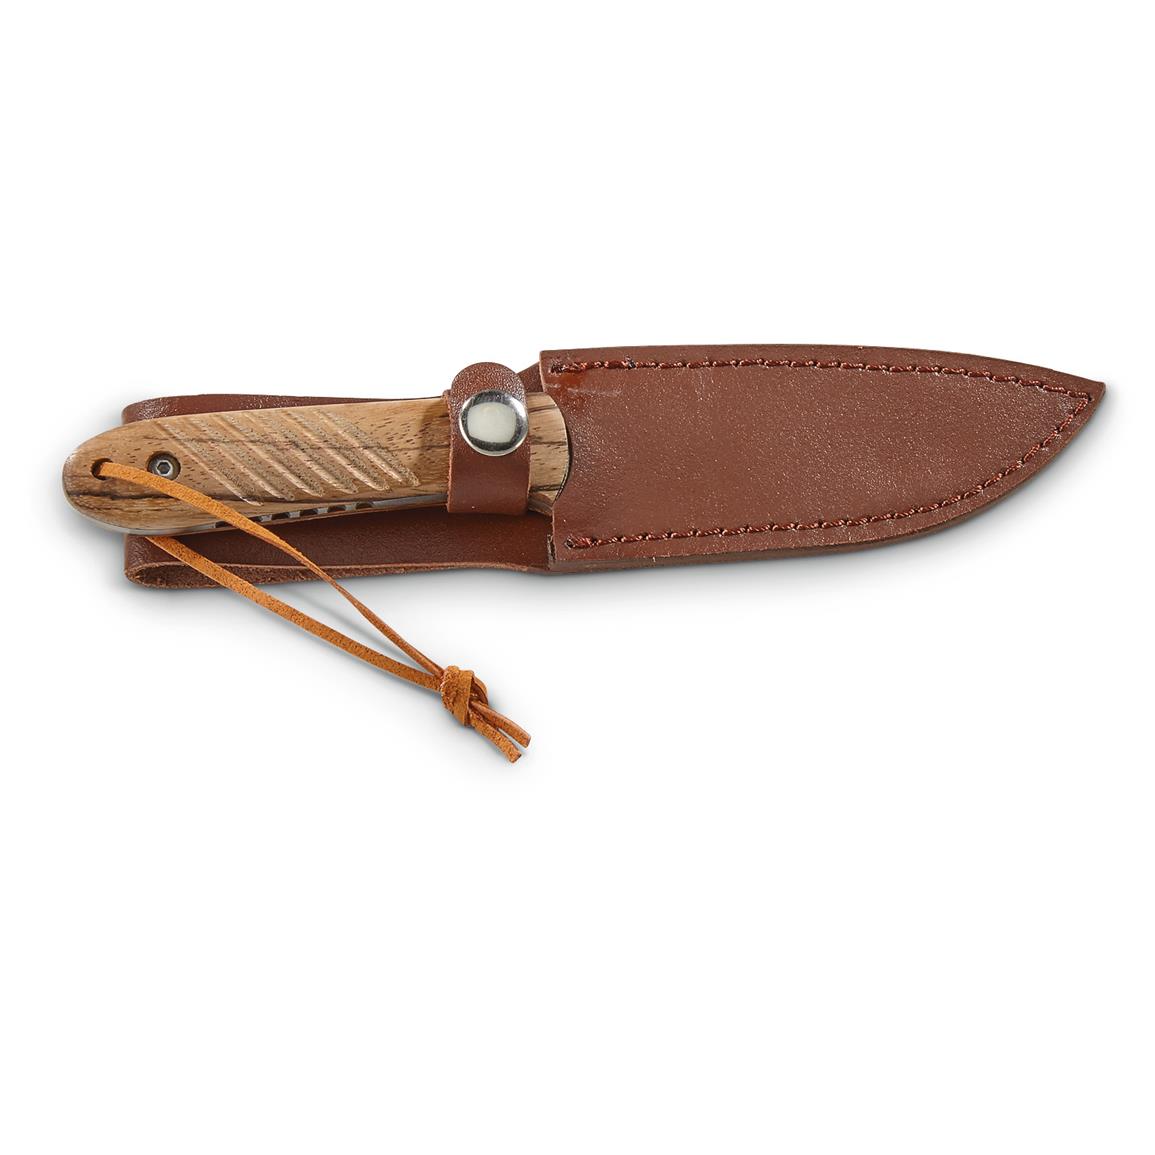 Woodworking hunting knife